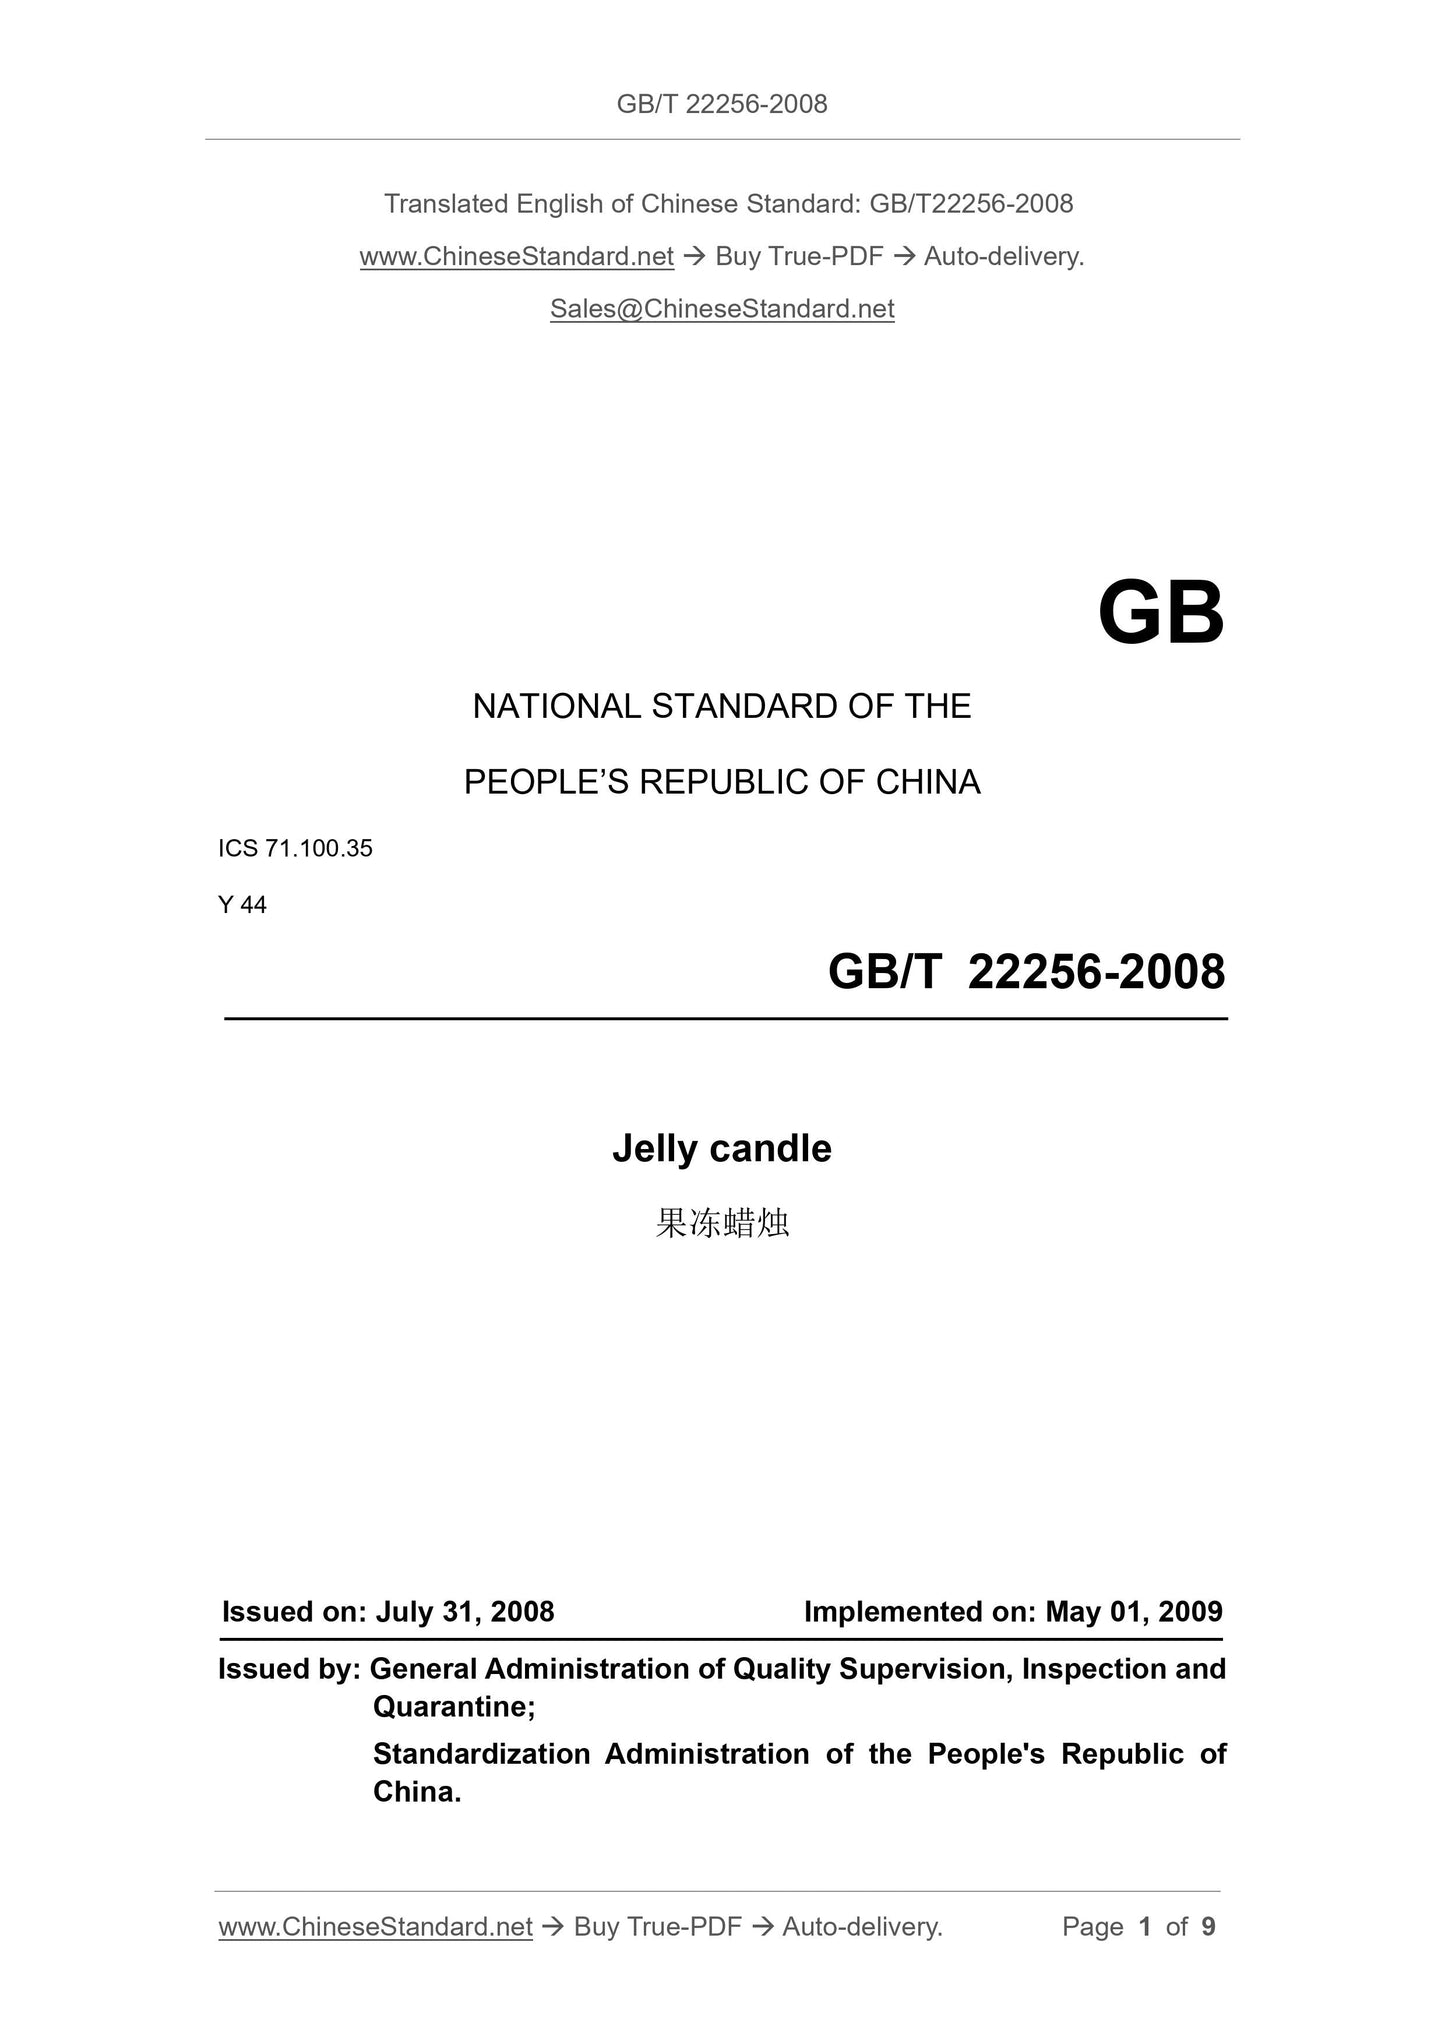 GB/T 22256-2008 Page 1